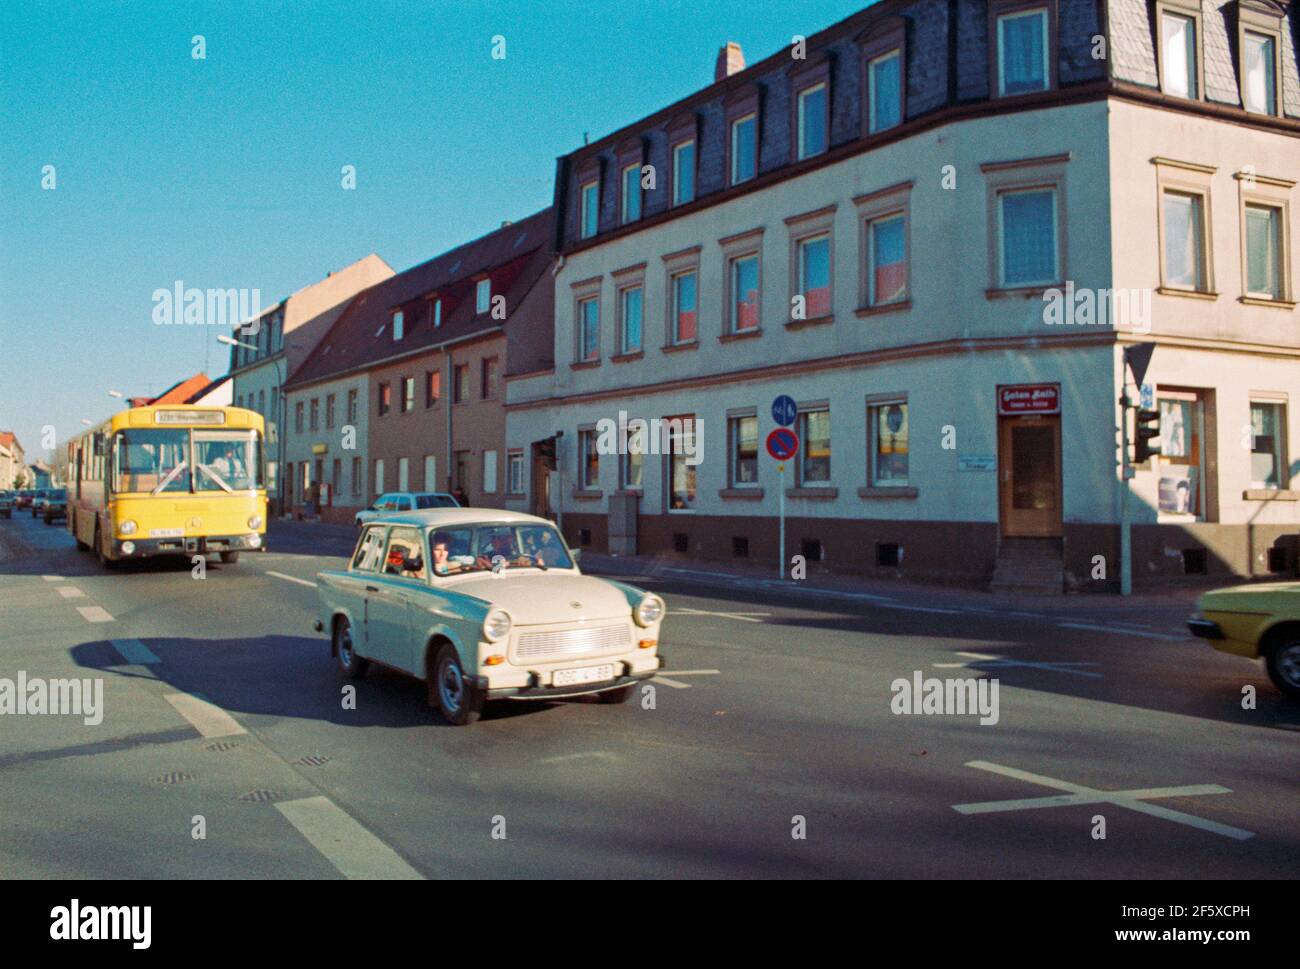 car from the GDR visiting, November 17, 1989, just one week after the Fall of the Berlin Wall, Bamberg, Franconia, Bavaria, Germany Stock Photo